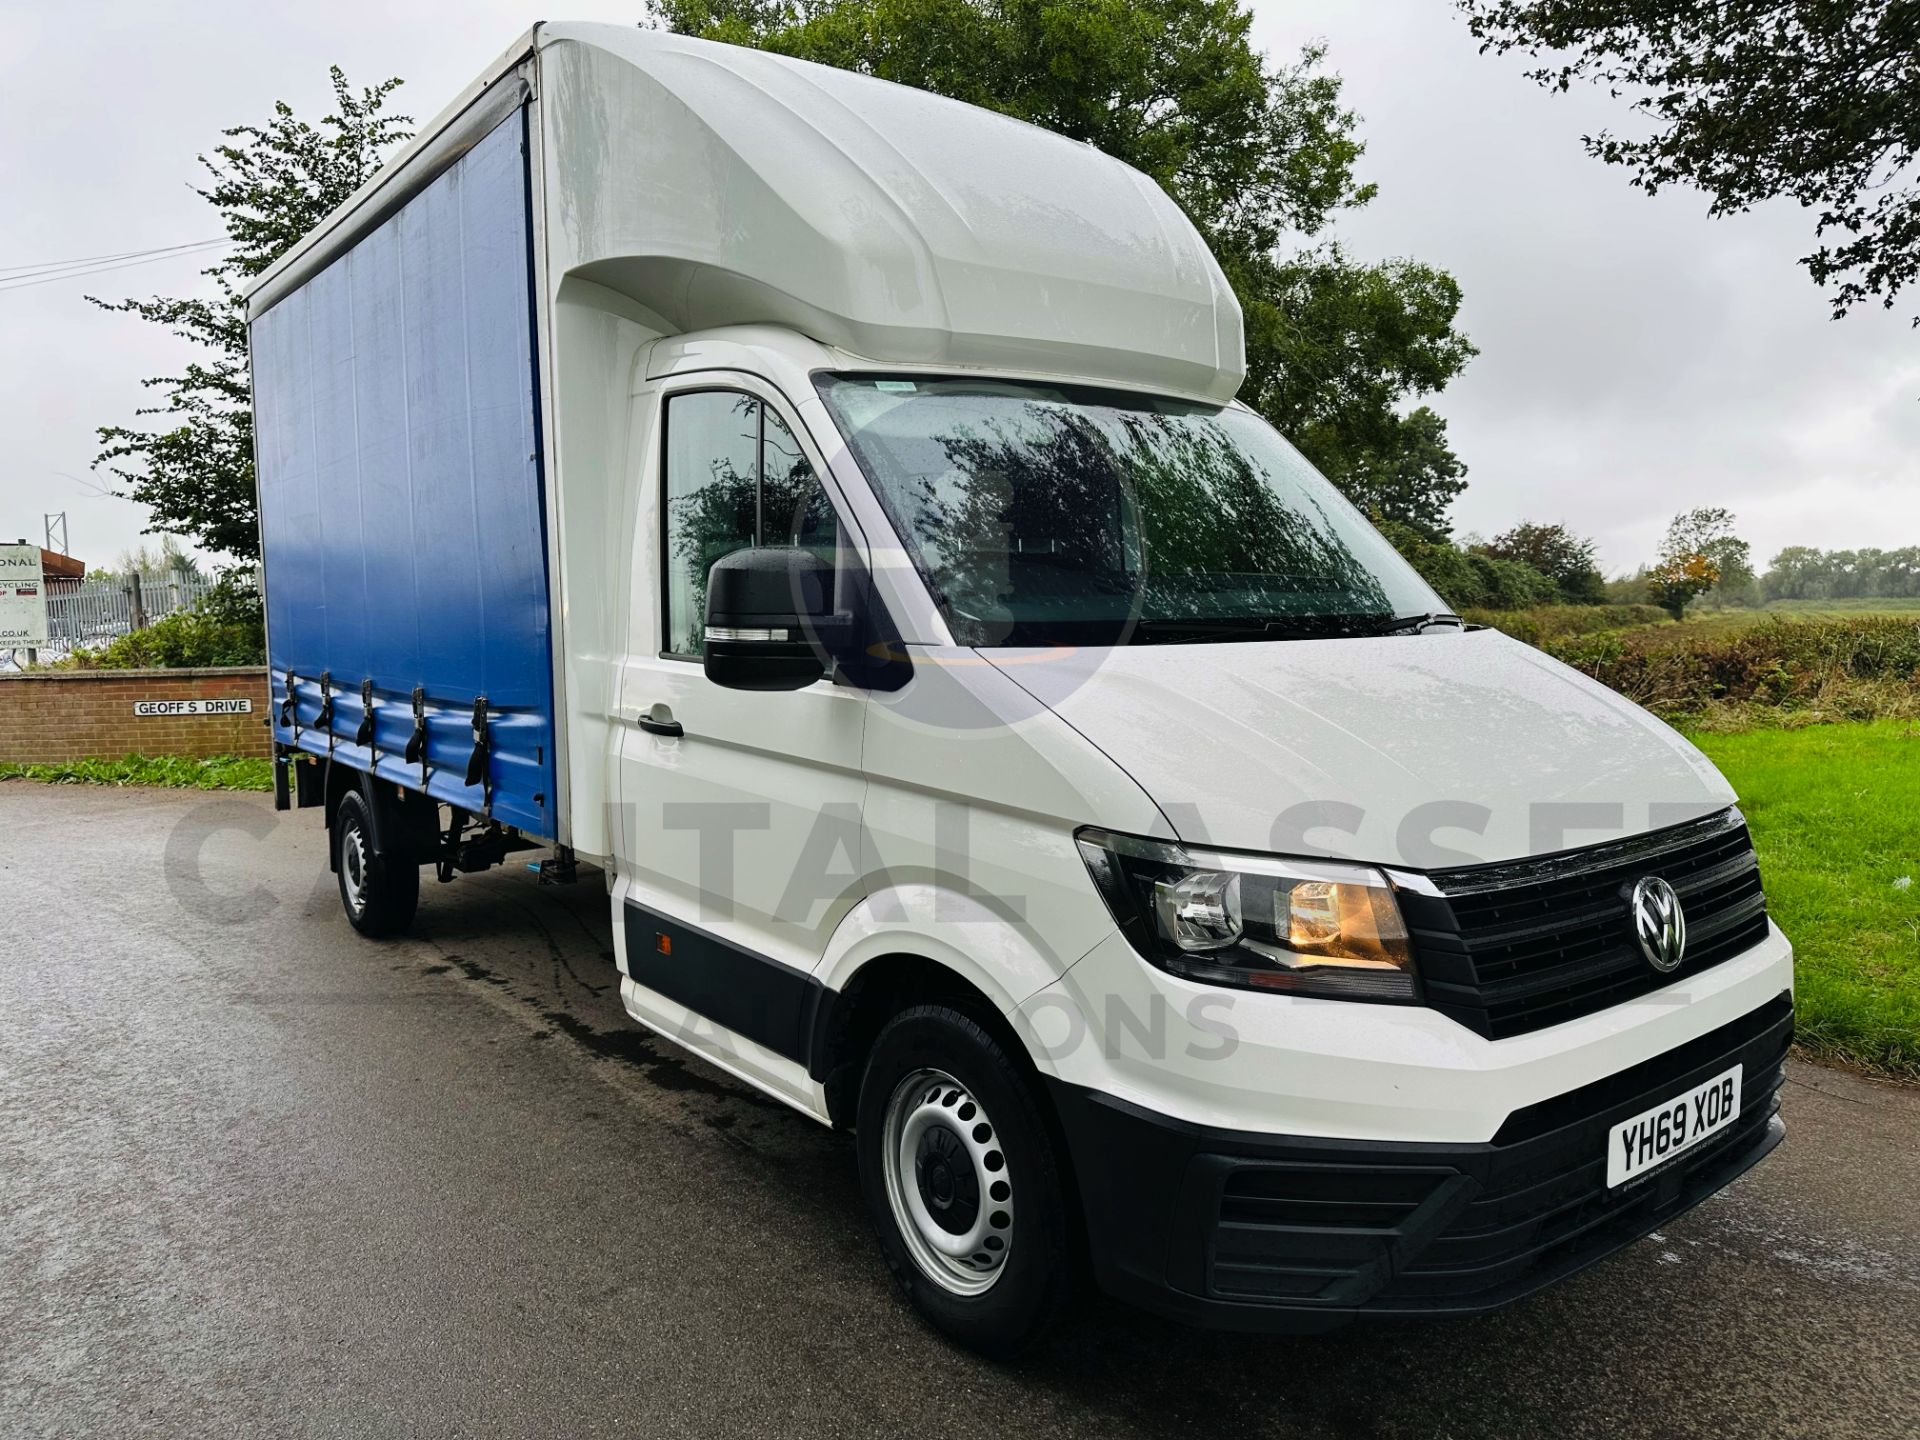 (On Sale) VOLKSWAGEN CRAFTER CR35 *LWB - CURTAIN SIDE* (69 REG - EURO 6) 2.0 TDI *EURO 6* (1 OWNER) - Image 2 of 26